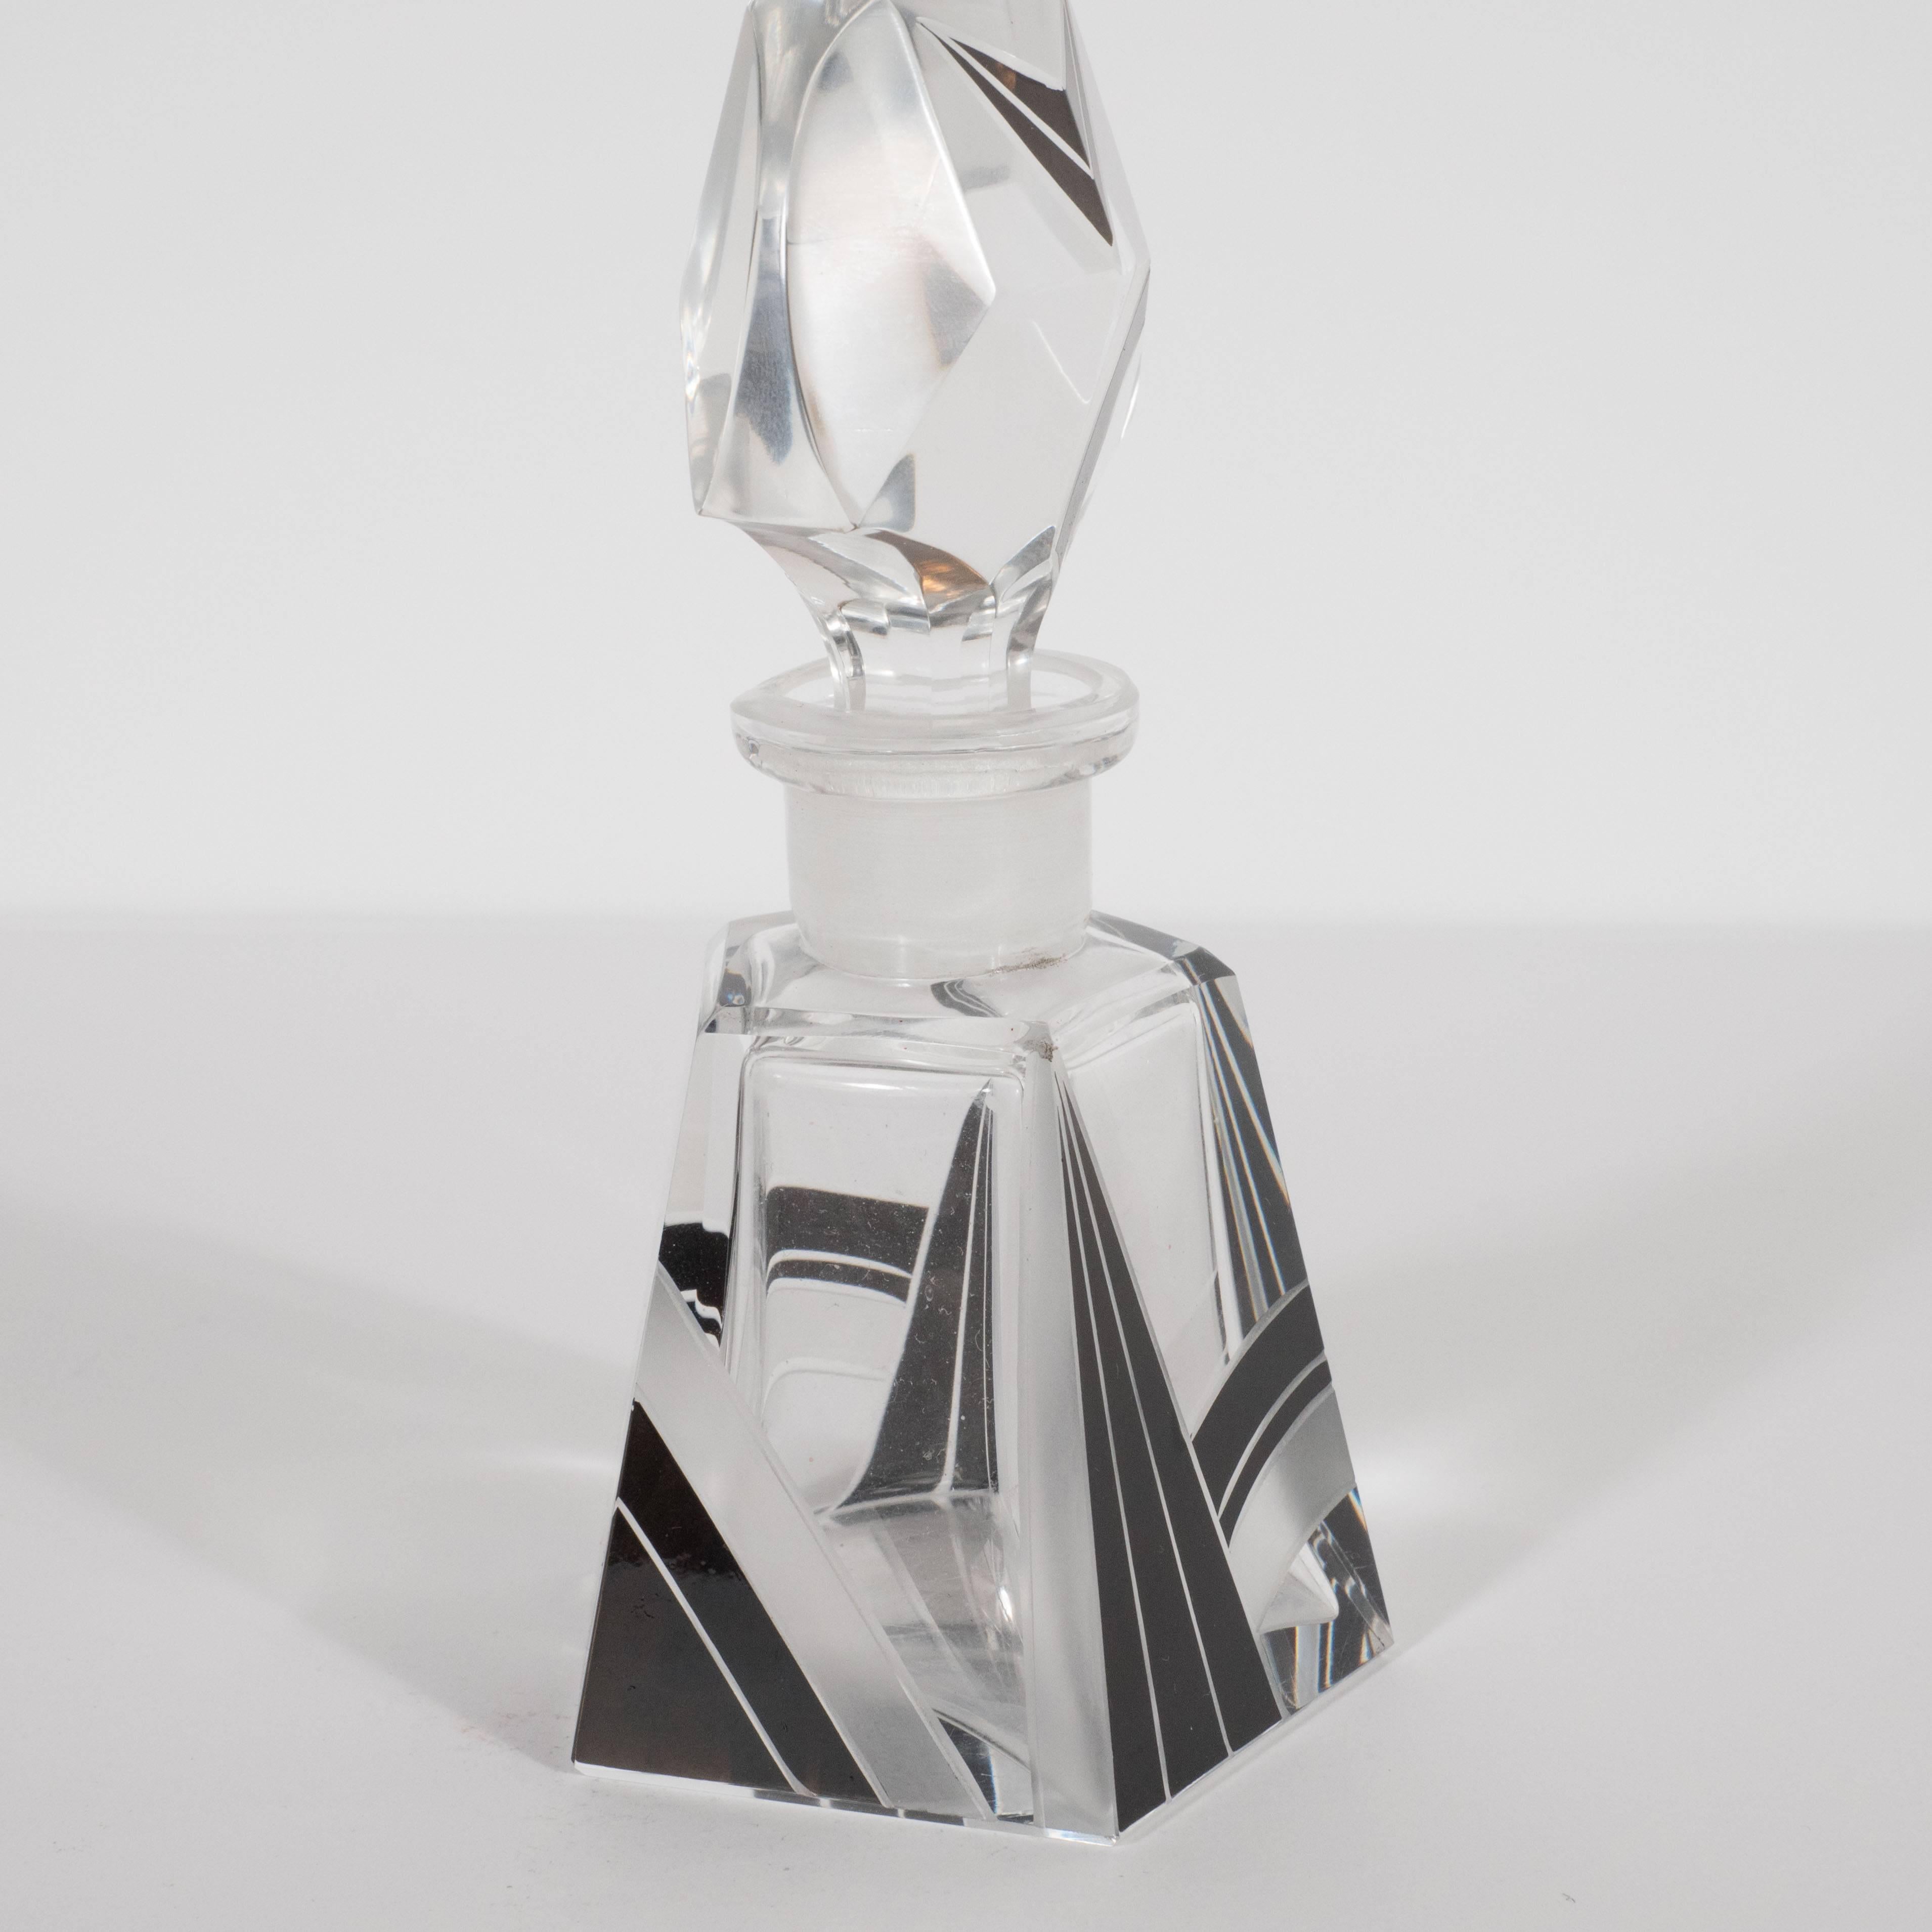 This refined Art Deco perfume bottle was realized in the Czech Republic (a country renowned for its glass production during this period), circa 1930. Its pentagonal form features a wealth of geometric cubist forms in black and frosted glass